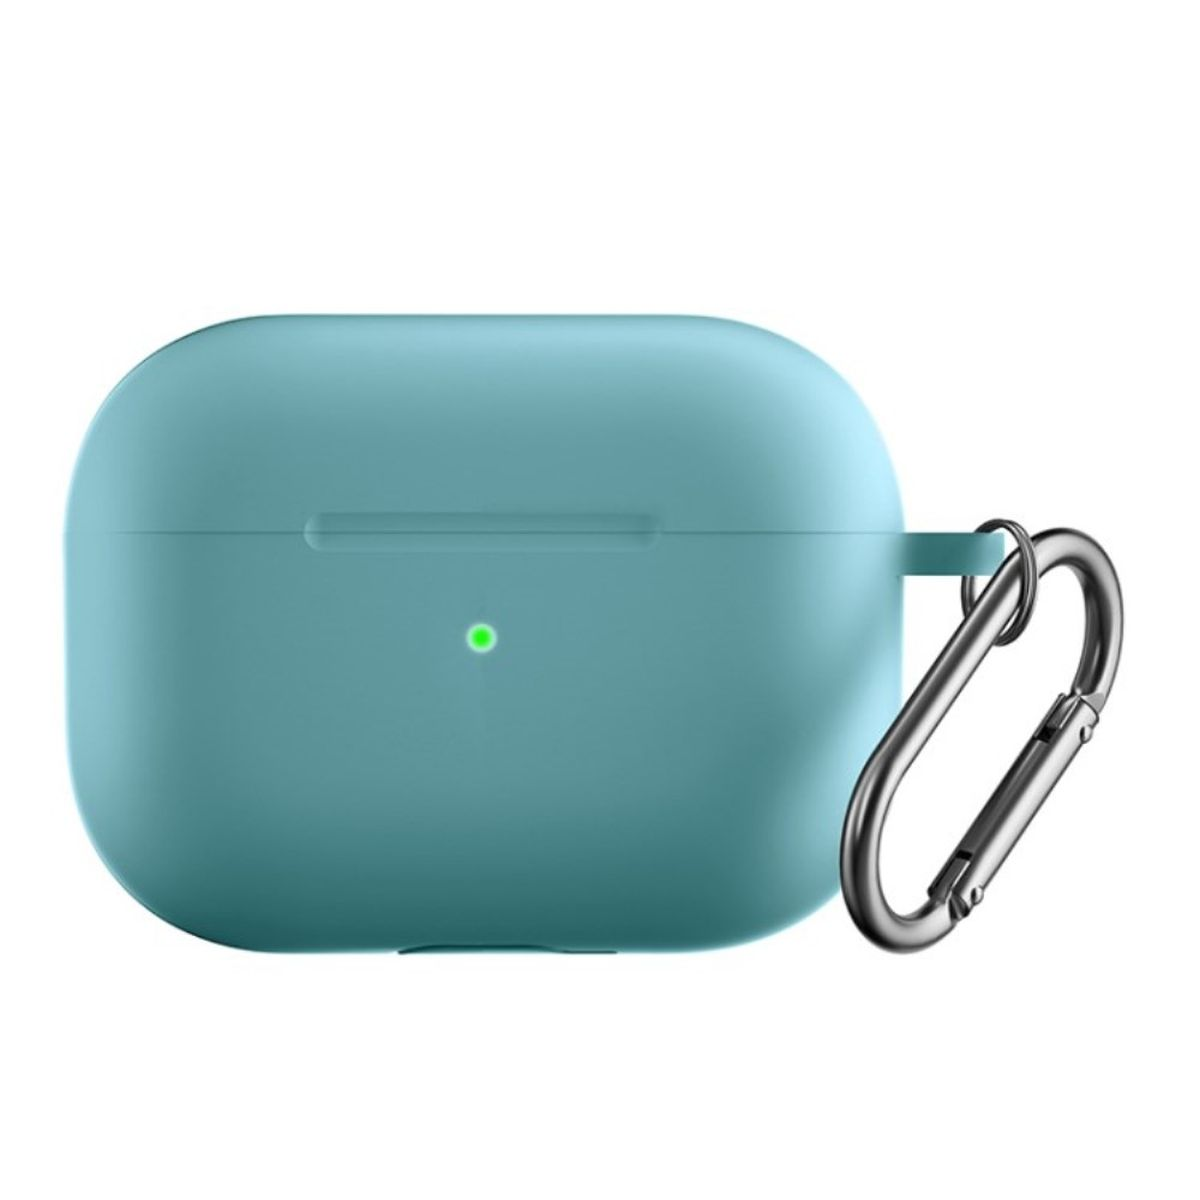 für Pro COVERKINGZ 77380 mint, Ladecase 2 Silikoncover Unisex, Apple Airpods